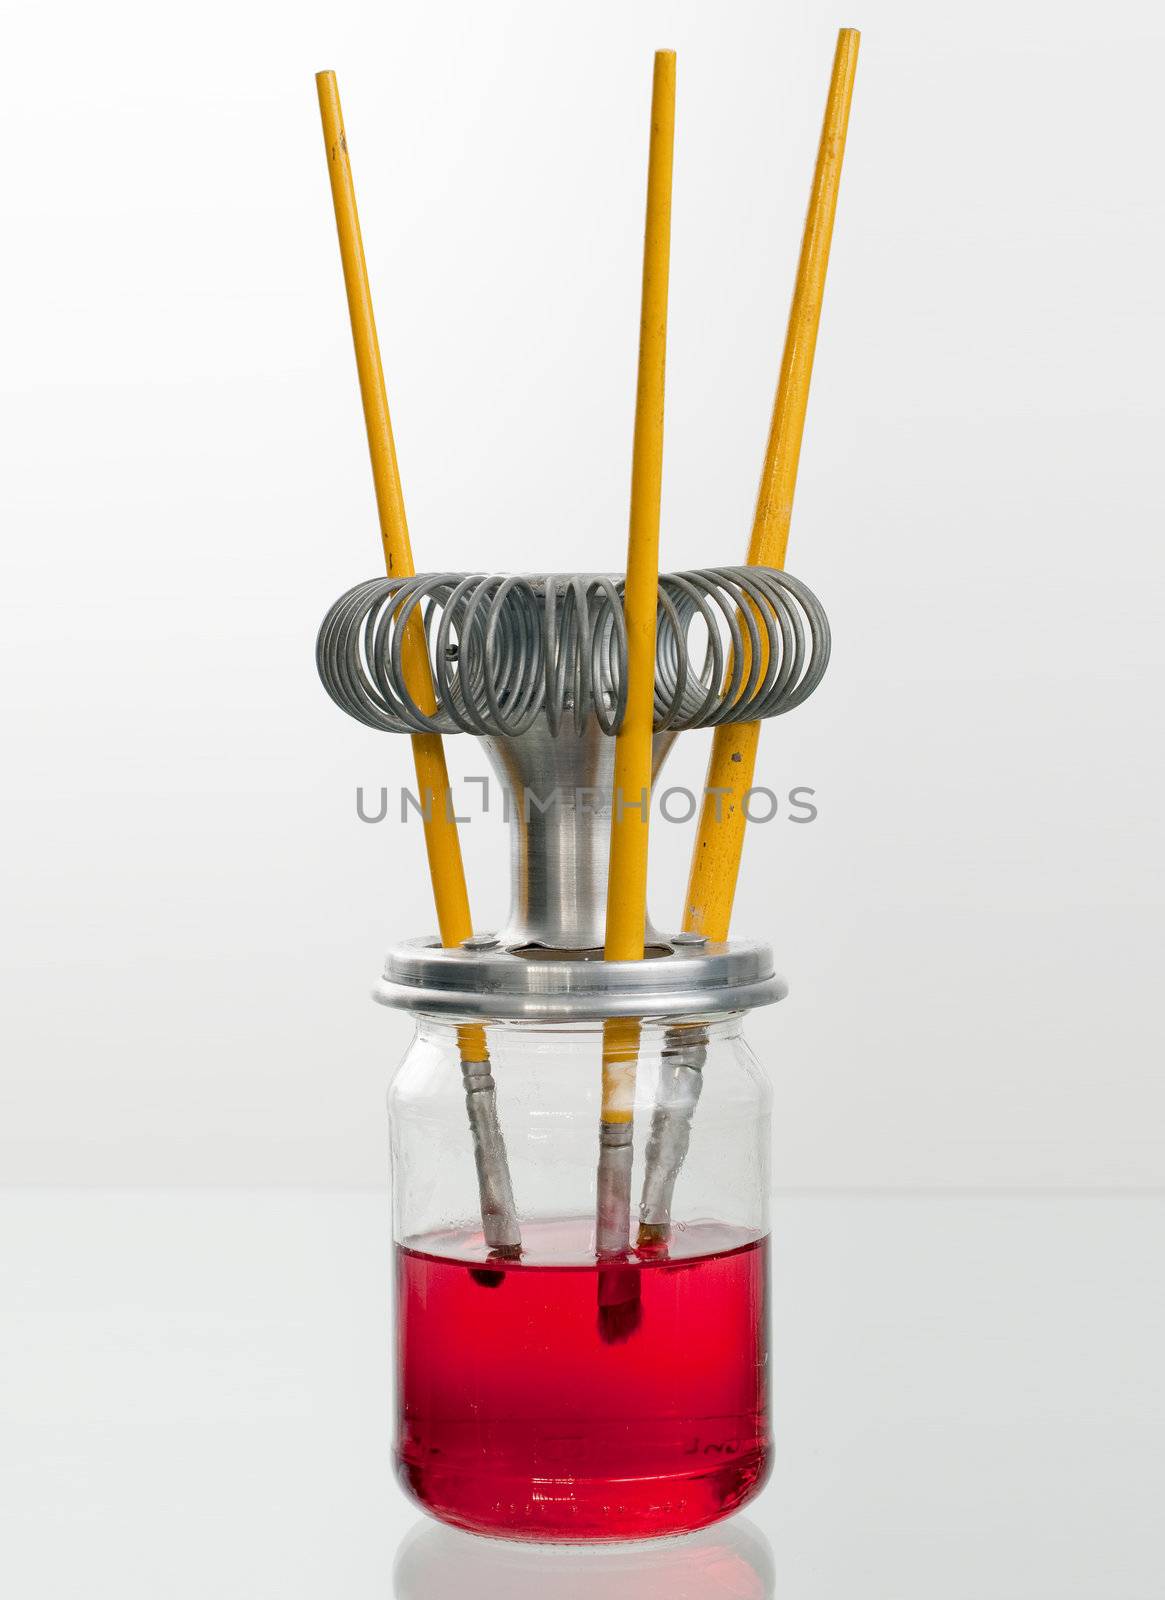 Three used paint brushes on a glass stand.